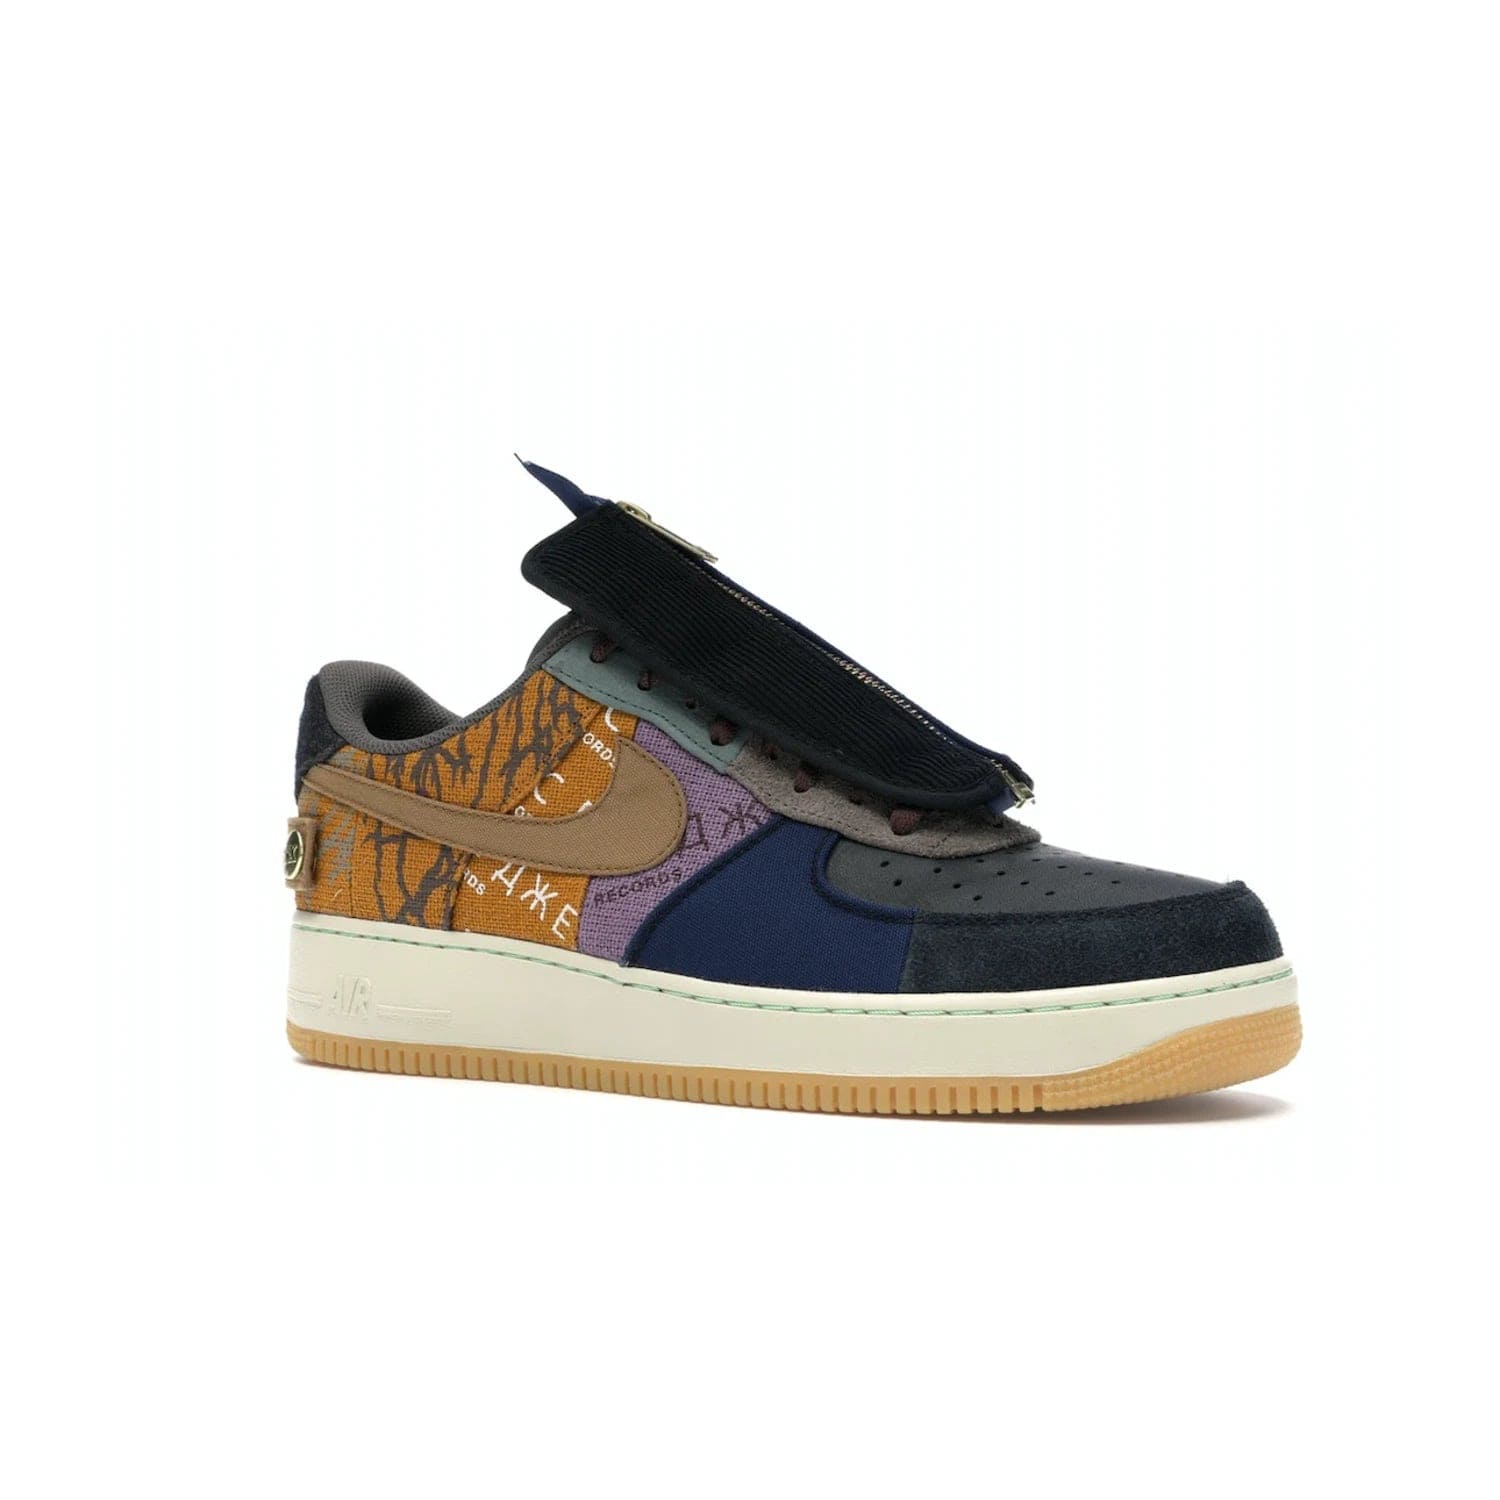 Nike Air Force 1 Low Travis Scott Cactus Jack - Image 4 - Only at www.BallersClubKickz.com - The Nike Air Force 1 Low Travis Scott Cactus Jack features a unique, multi-colored patchwork upper with muted bronze and fossil accents. Includes detachable lace cover, brass zipper, and Cactus Jack insignias. A sail midsole, gum rubber outsole complete the eye-catching design. Perfect for comfort and style with unexpected touches of detail.